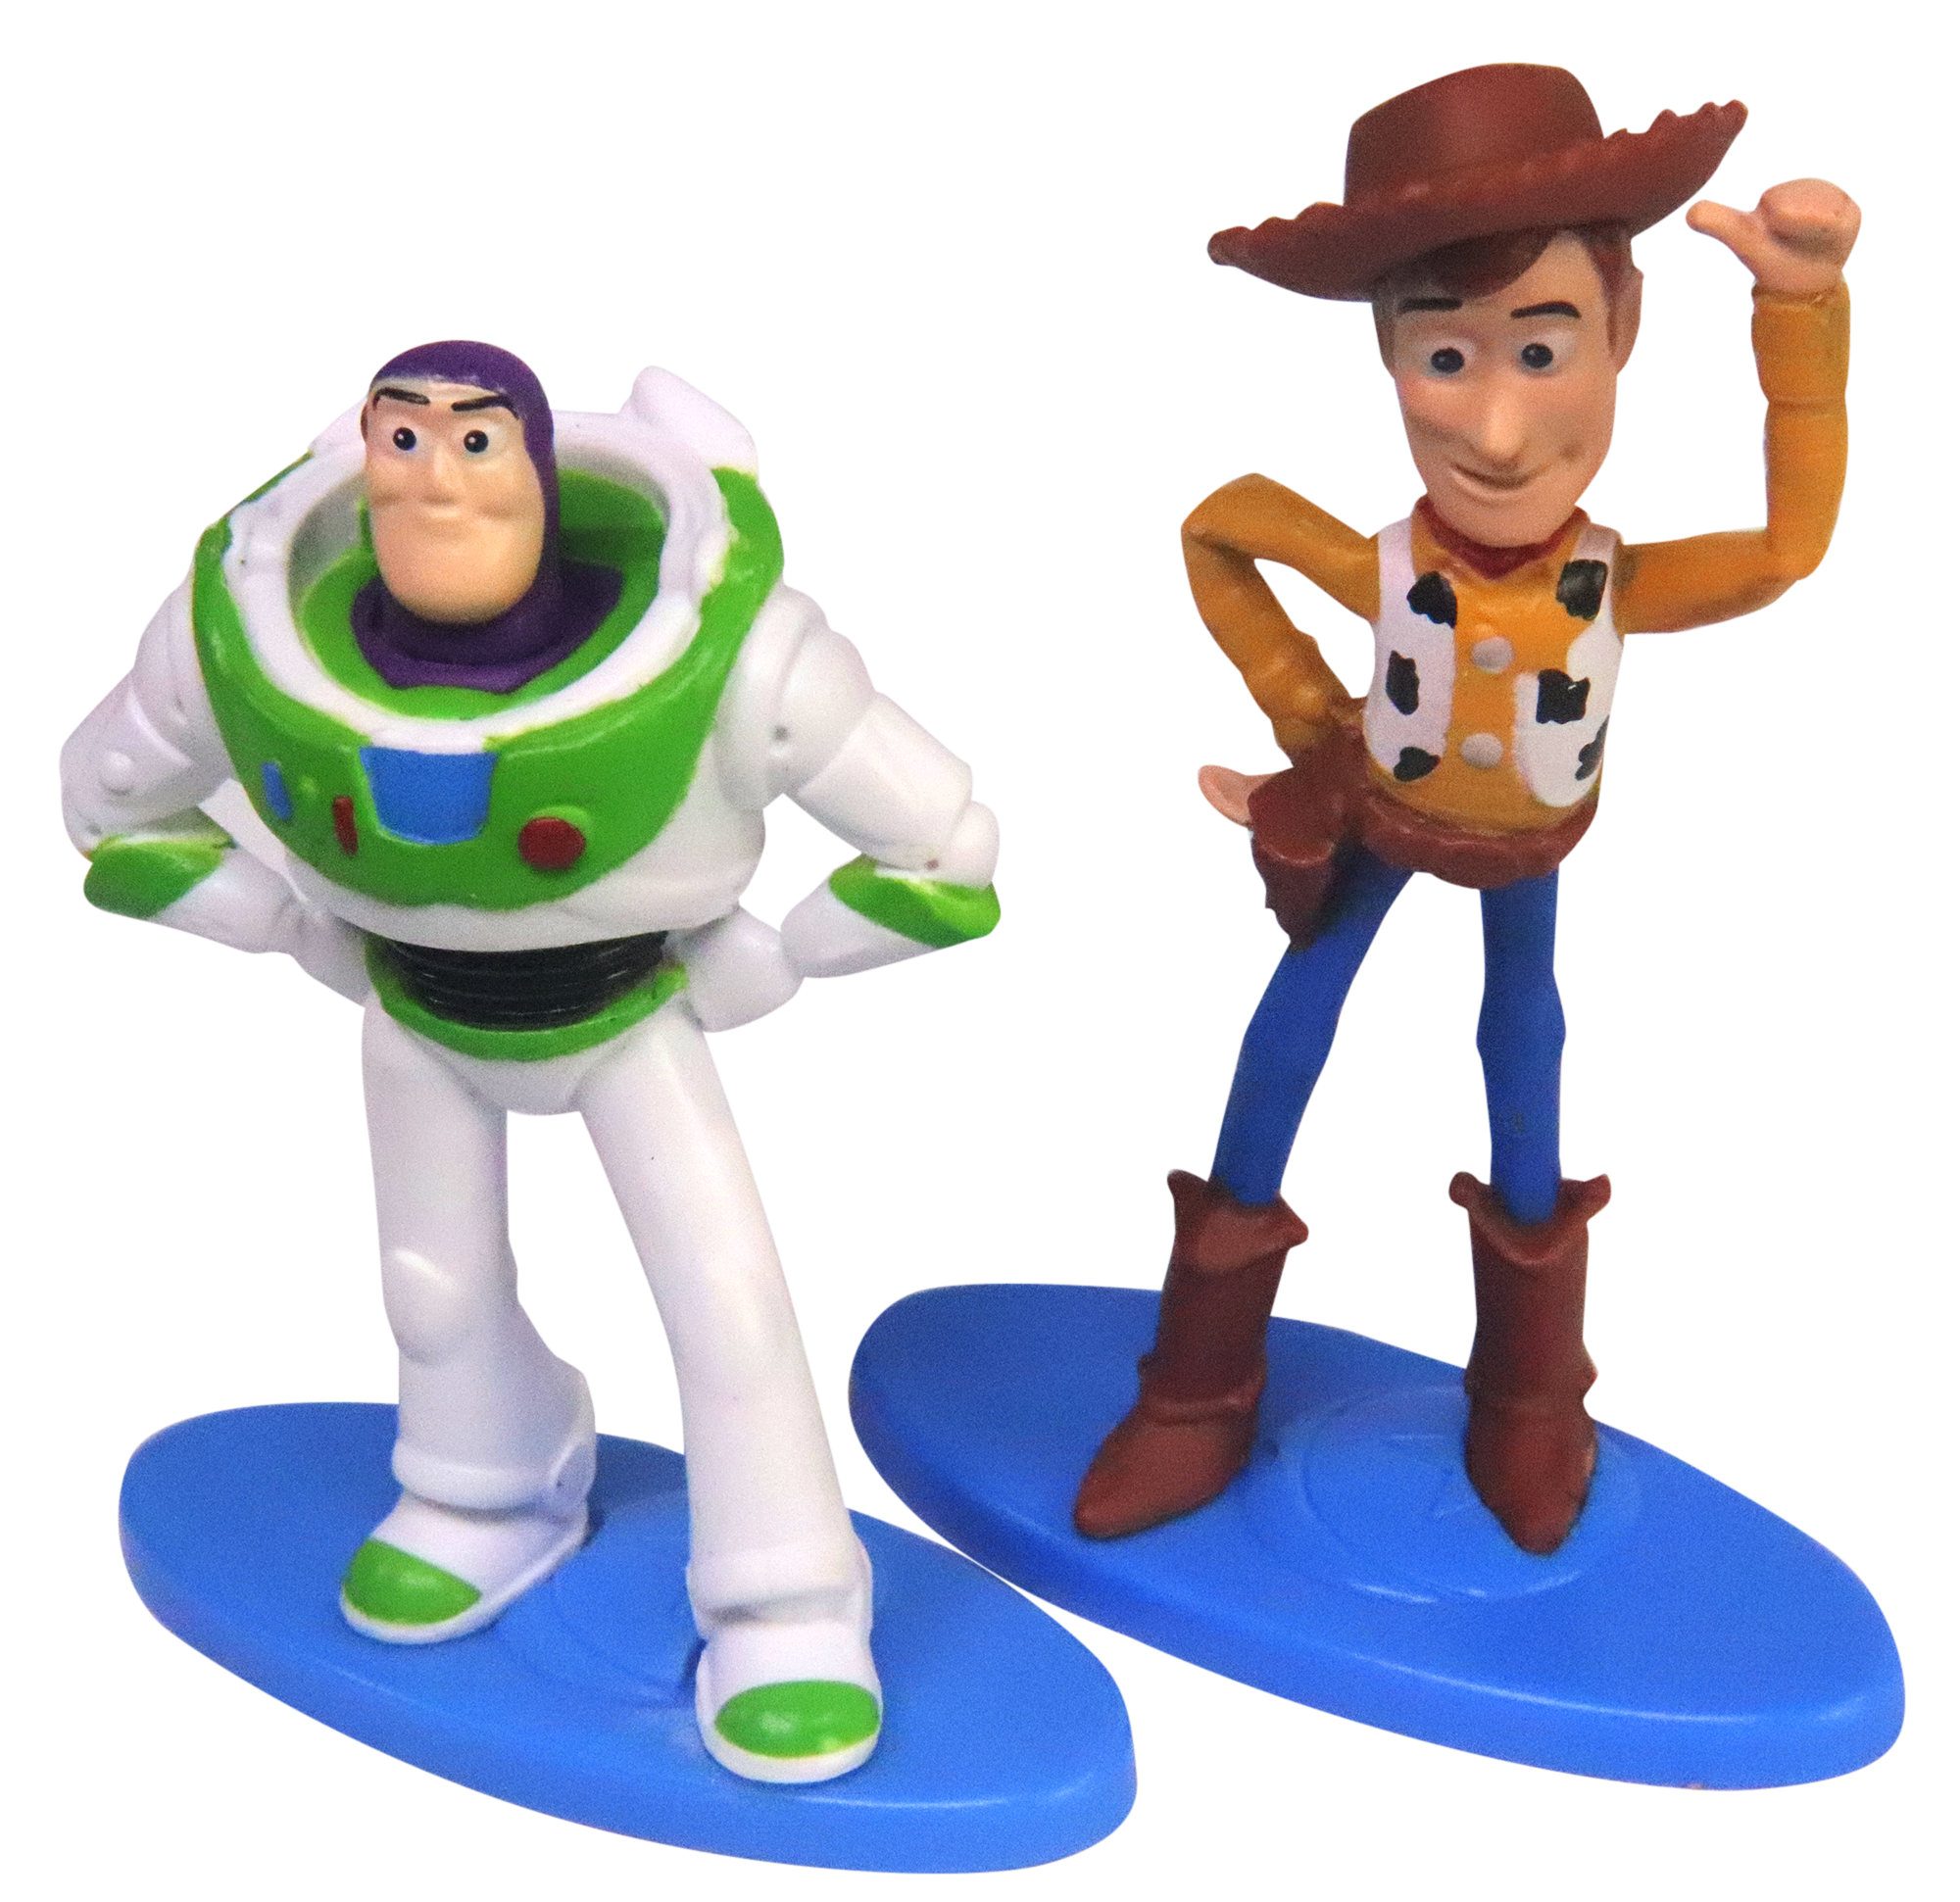 Details about   Lot of 4 Disney Pixar TOY STORY 2” figures BUZZ LIGHTYEAR Cake Toppers Mattel 